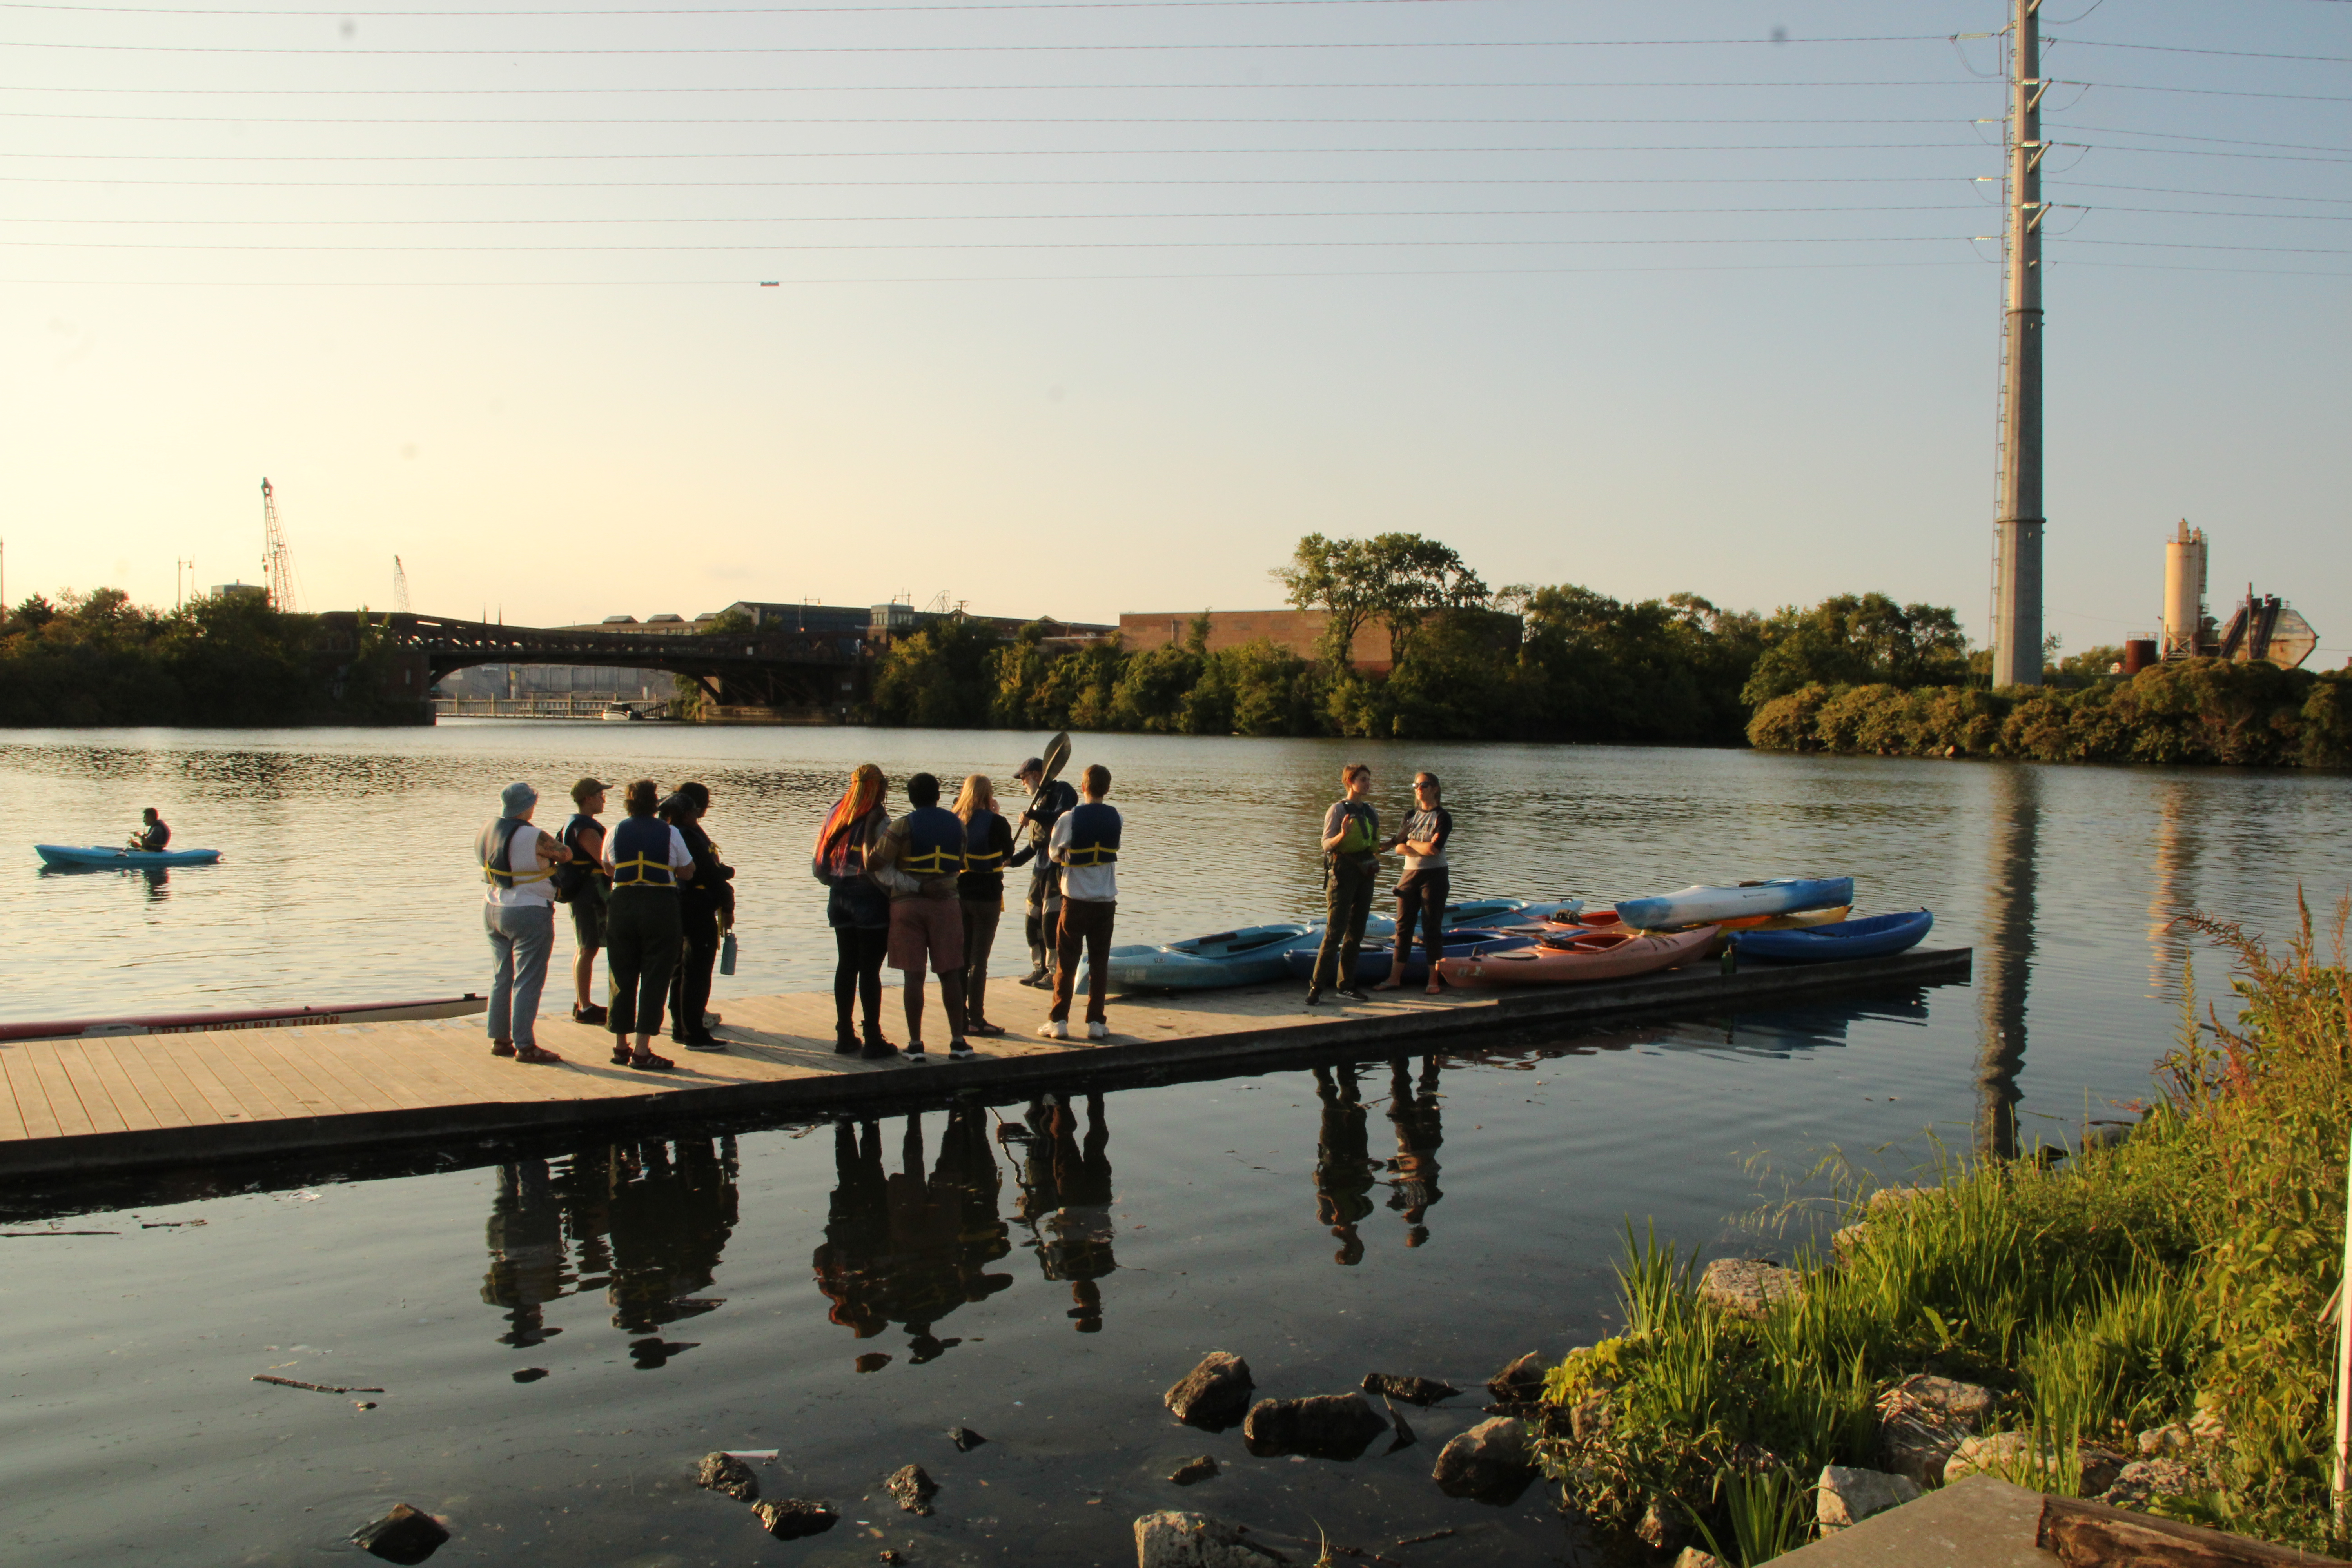 A group about a dozen people stand on a pier on a river, with kayaks staged nearby. It appears to be sunset.